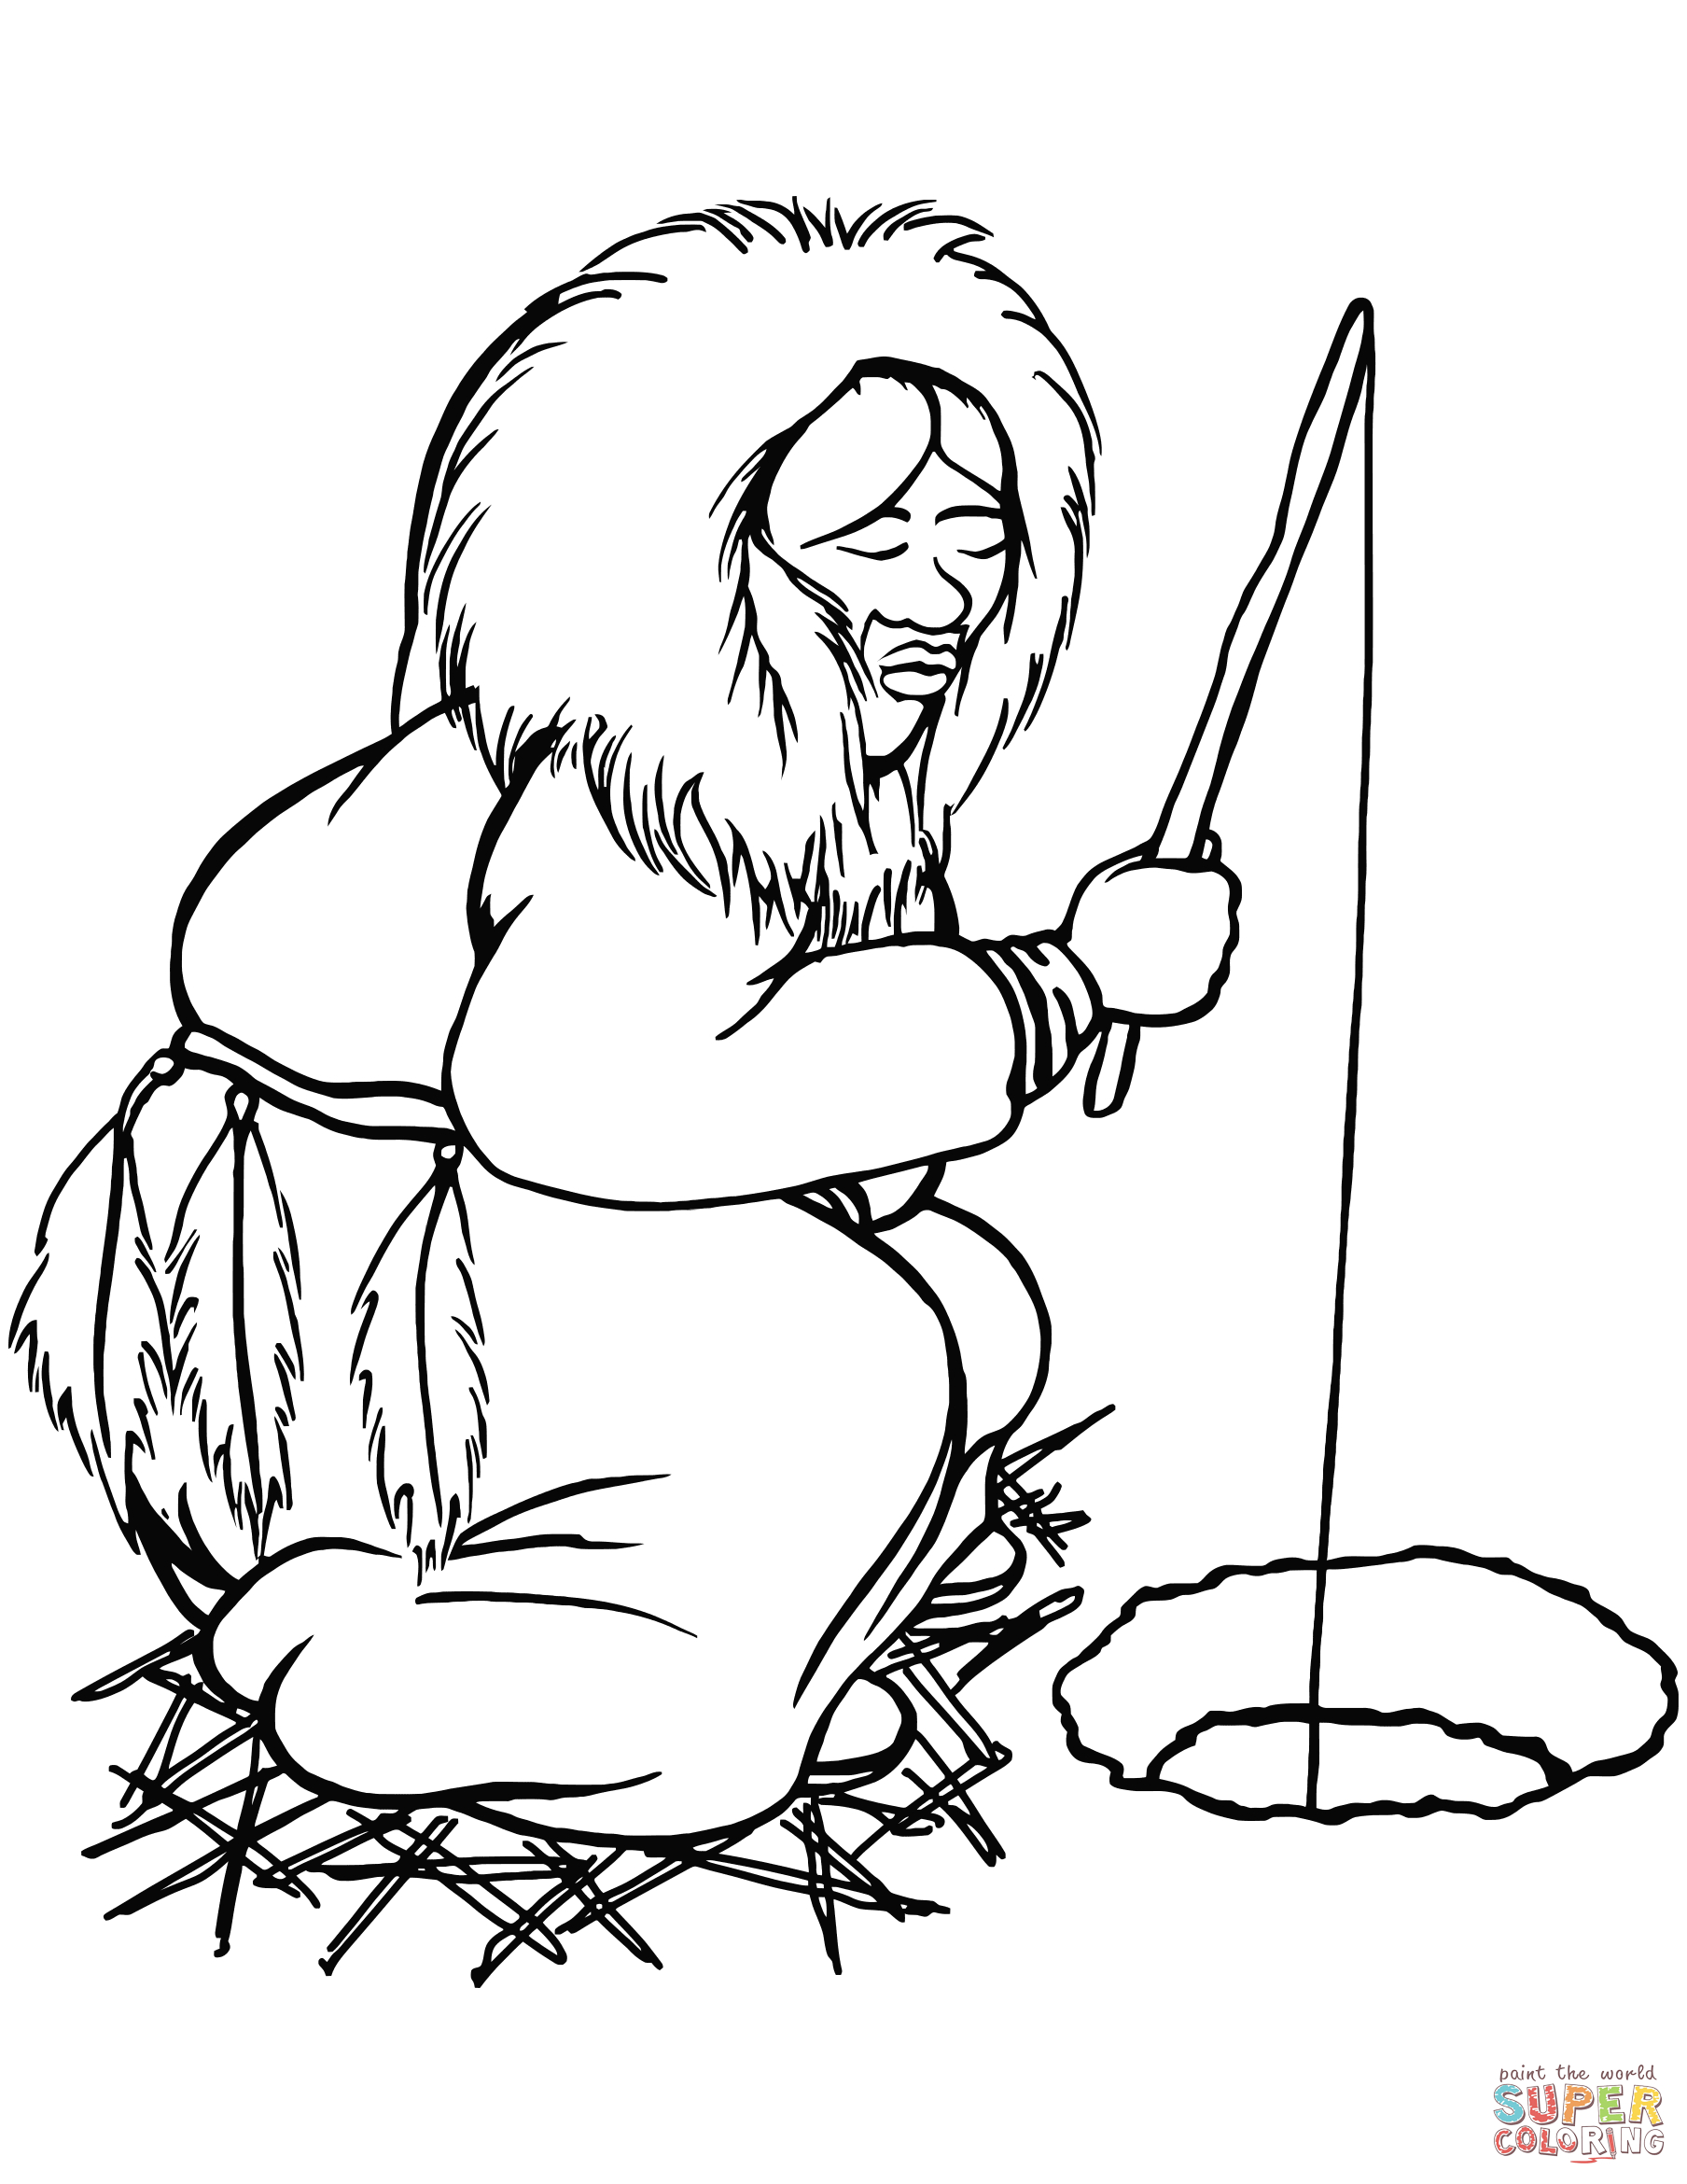 Inuit Coloring Pages Inuit Eskimo Coloring Pages Free Coloring Pages